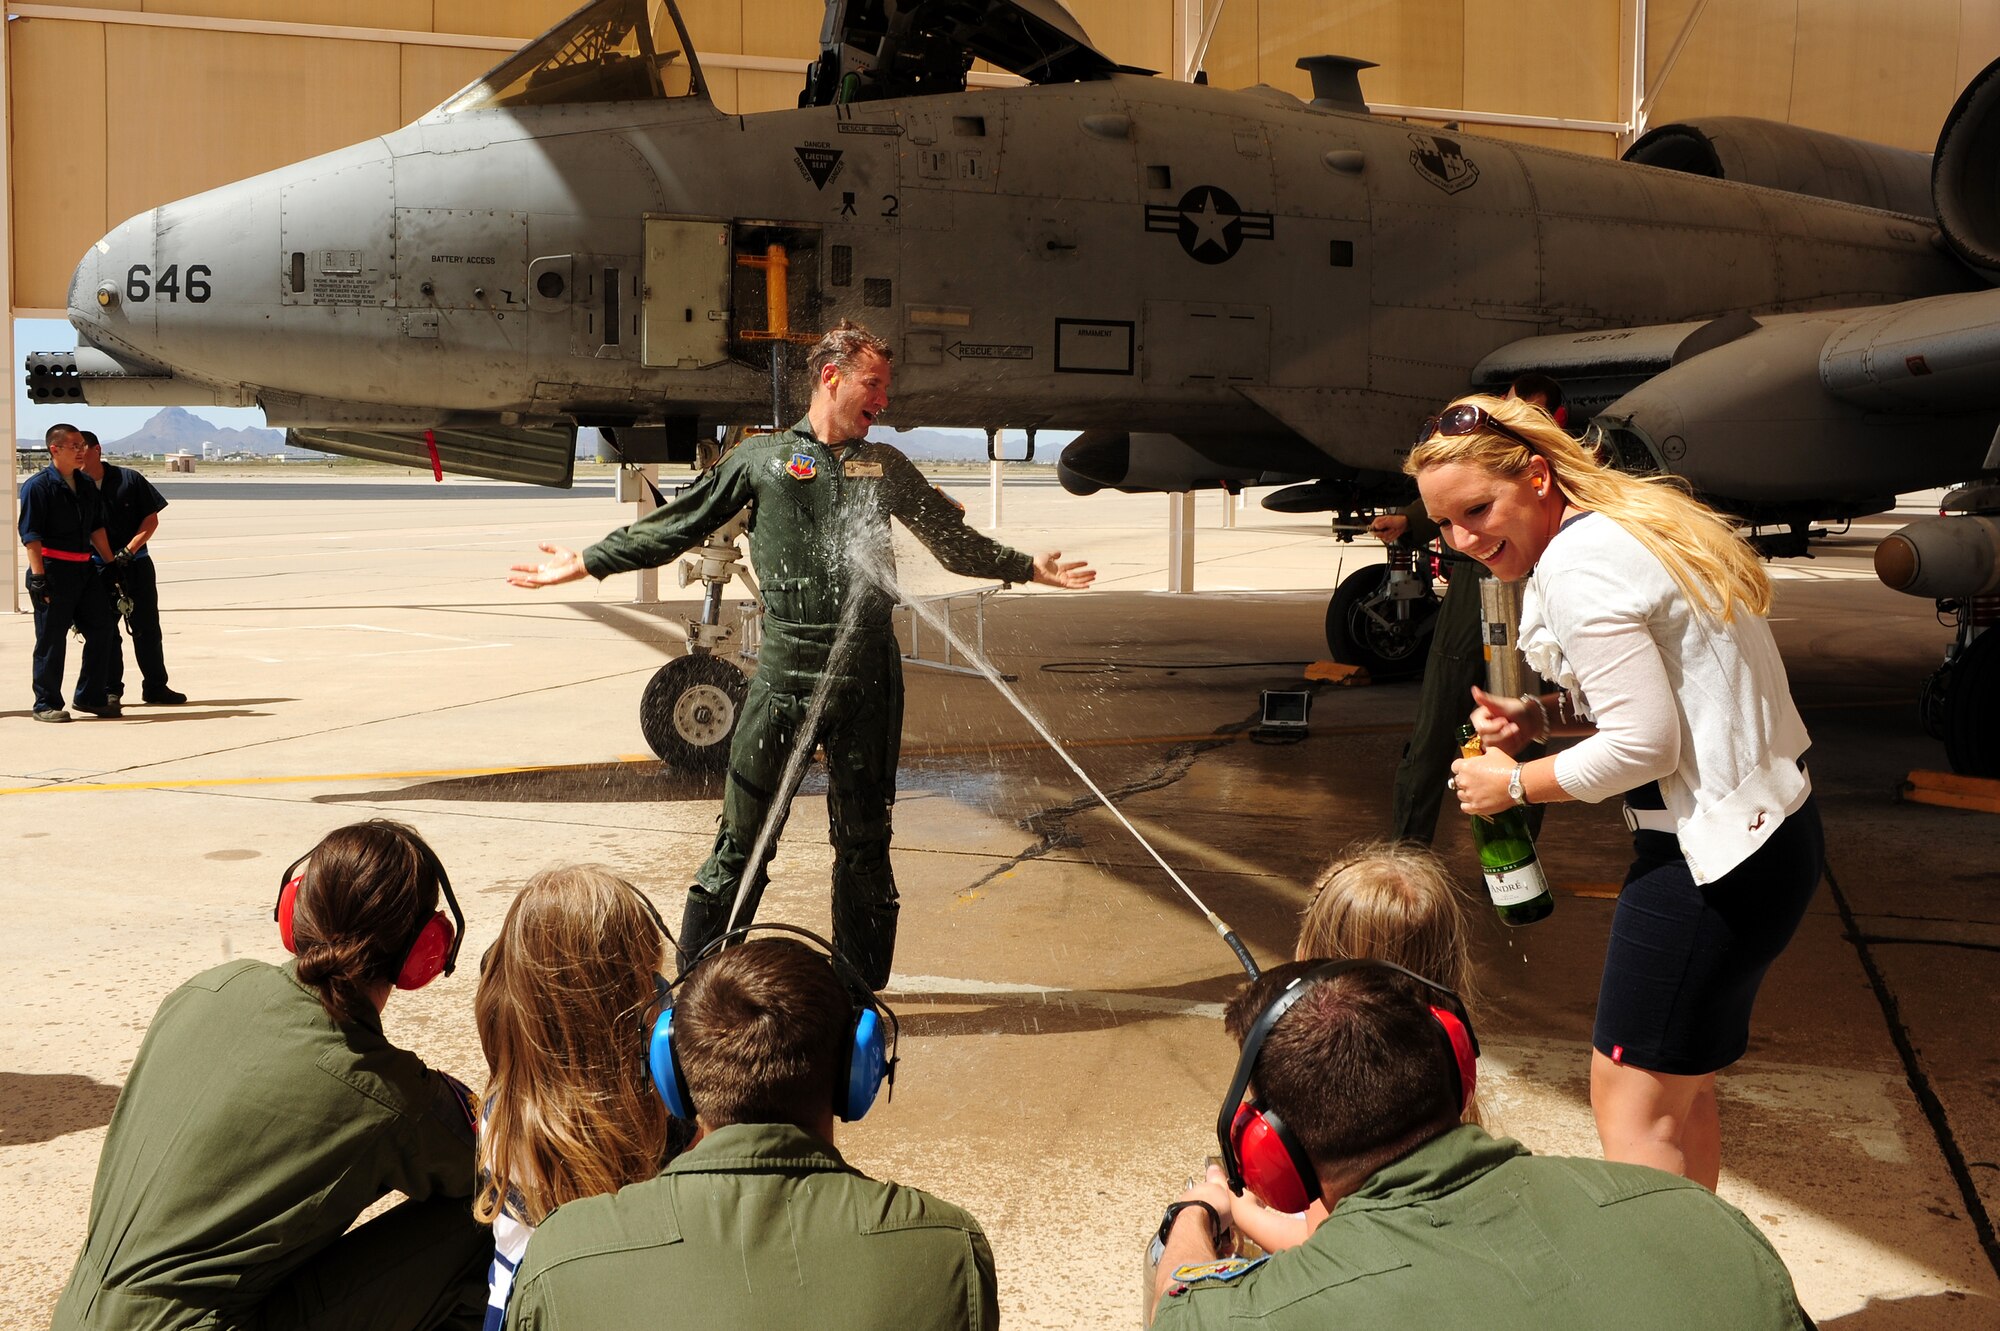 German Maj. Andreas Jeschek, 354th Fighter Squadron assistant director of operations, is sprayed with champagne and water after disembarking an A-10 Thunderbolt during his final flight ceremony at Davis-Monthan Air Force Base, Ariz., March 21, 2014. Jeschek deployed with the Bulldogs to Afghanistan, and flew close to 100 missions. (U.S. Air Force photo by Senior Airman Camilla Elizeu/Released)